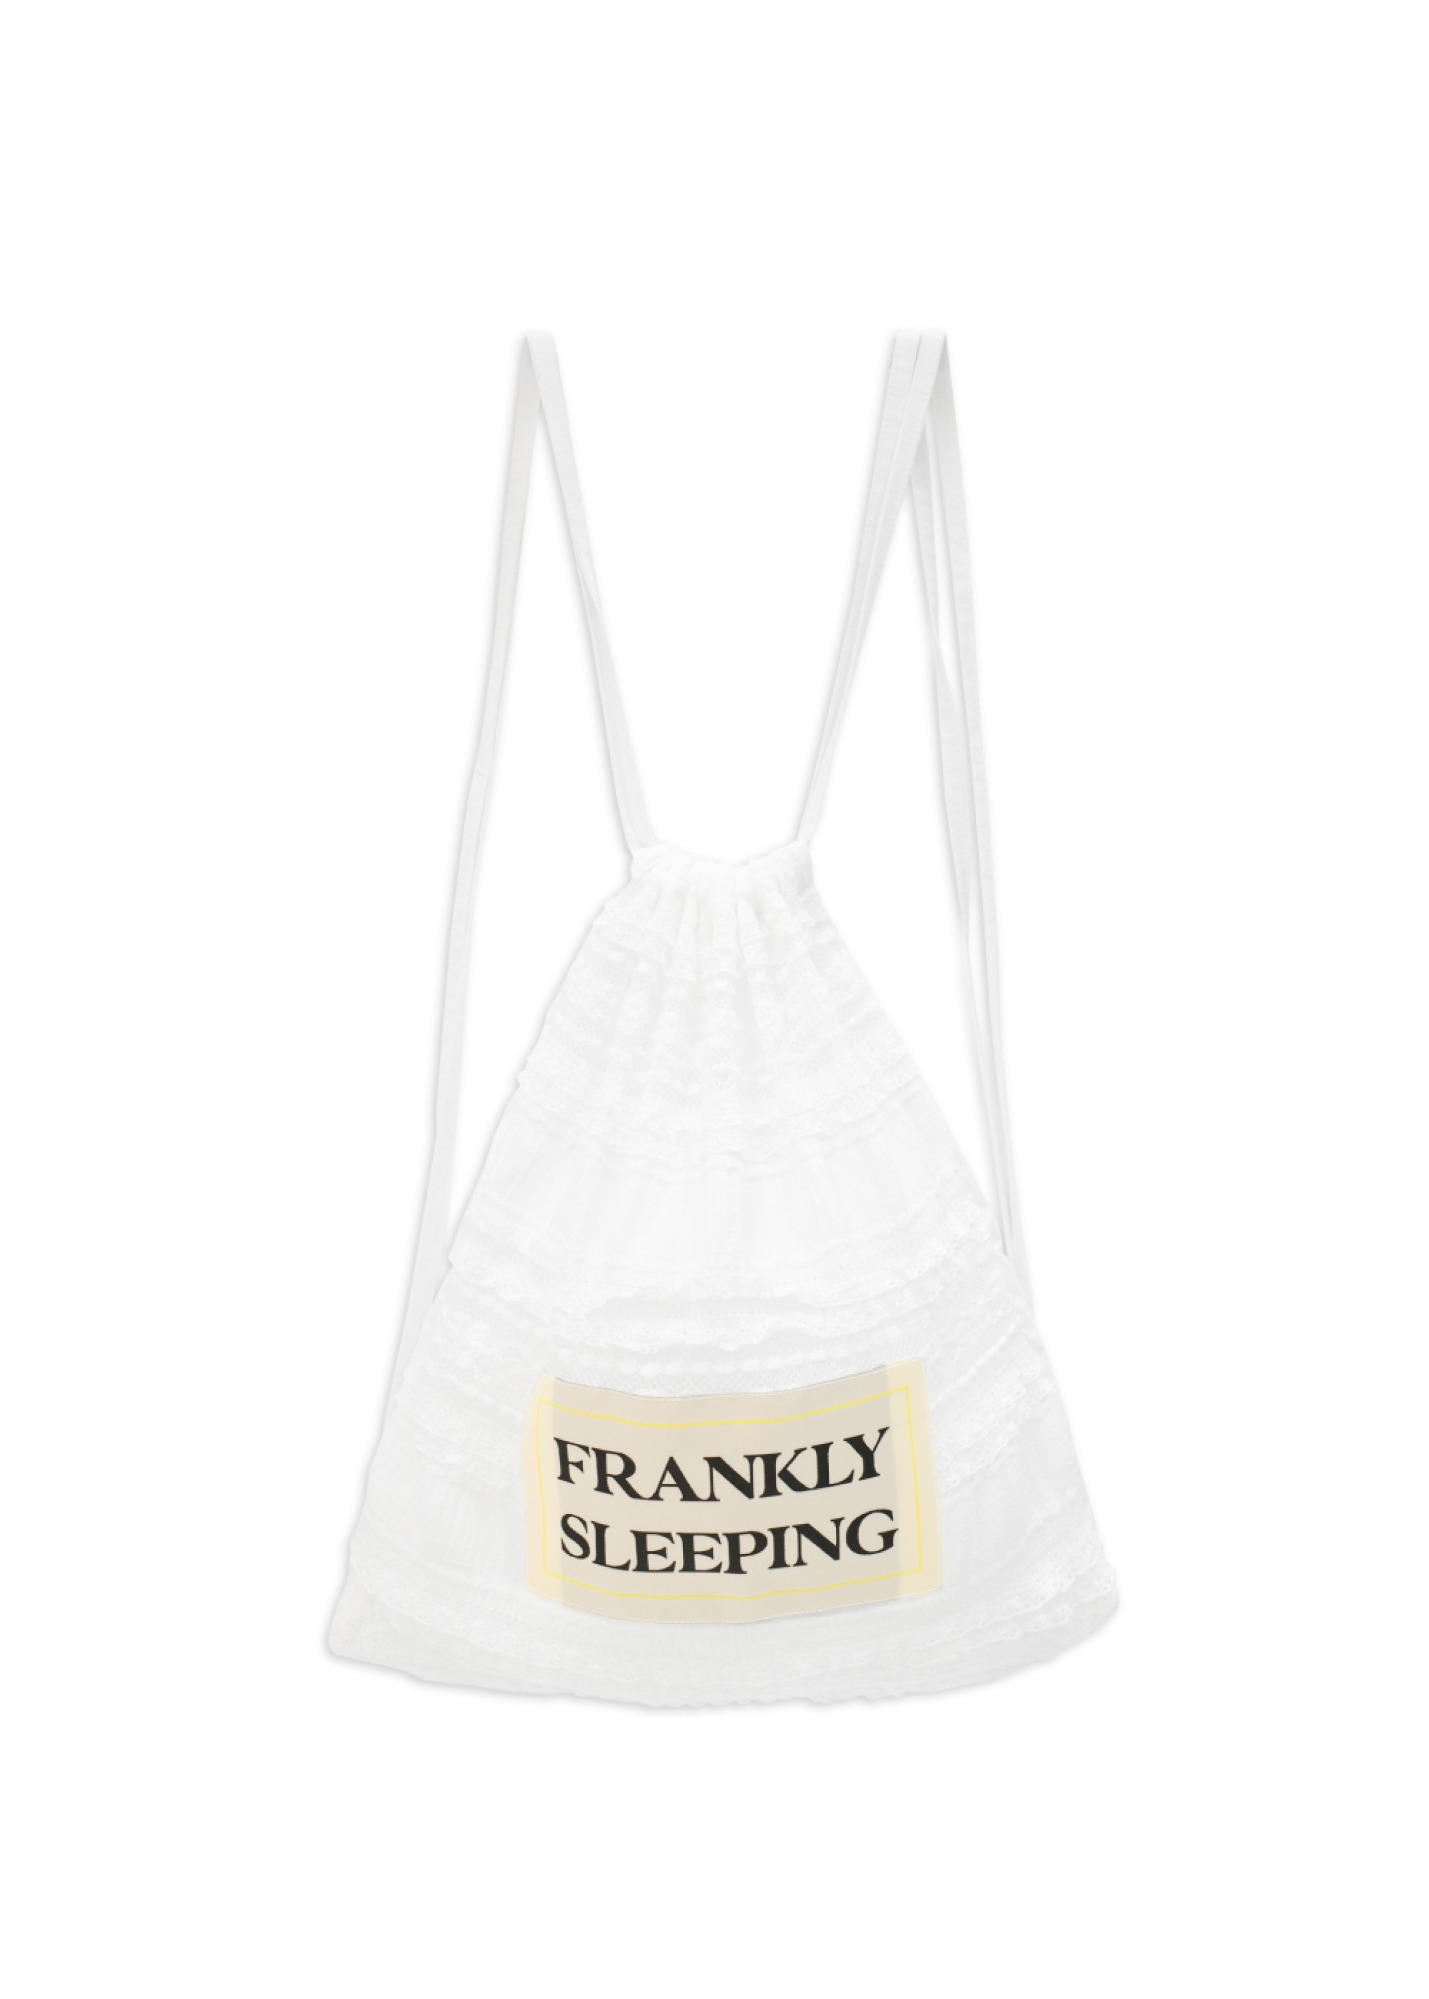 Frankly Sleeping String Bag, White,FRANKLY